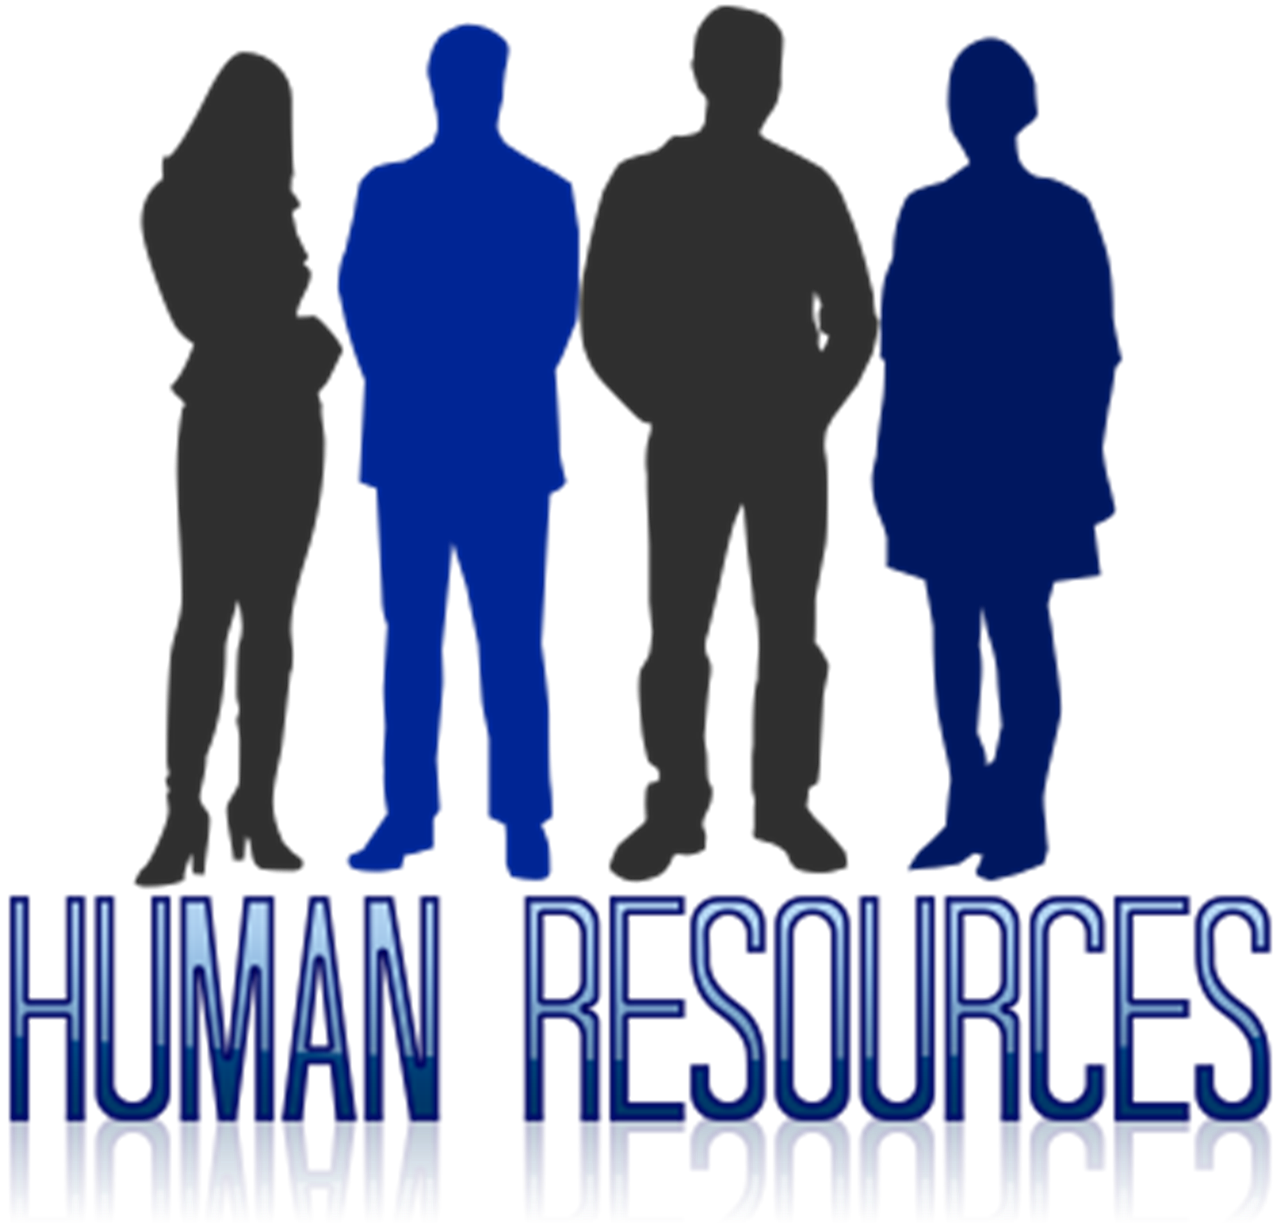 Benefits of HR outsourcing